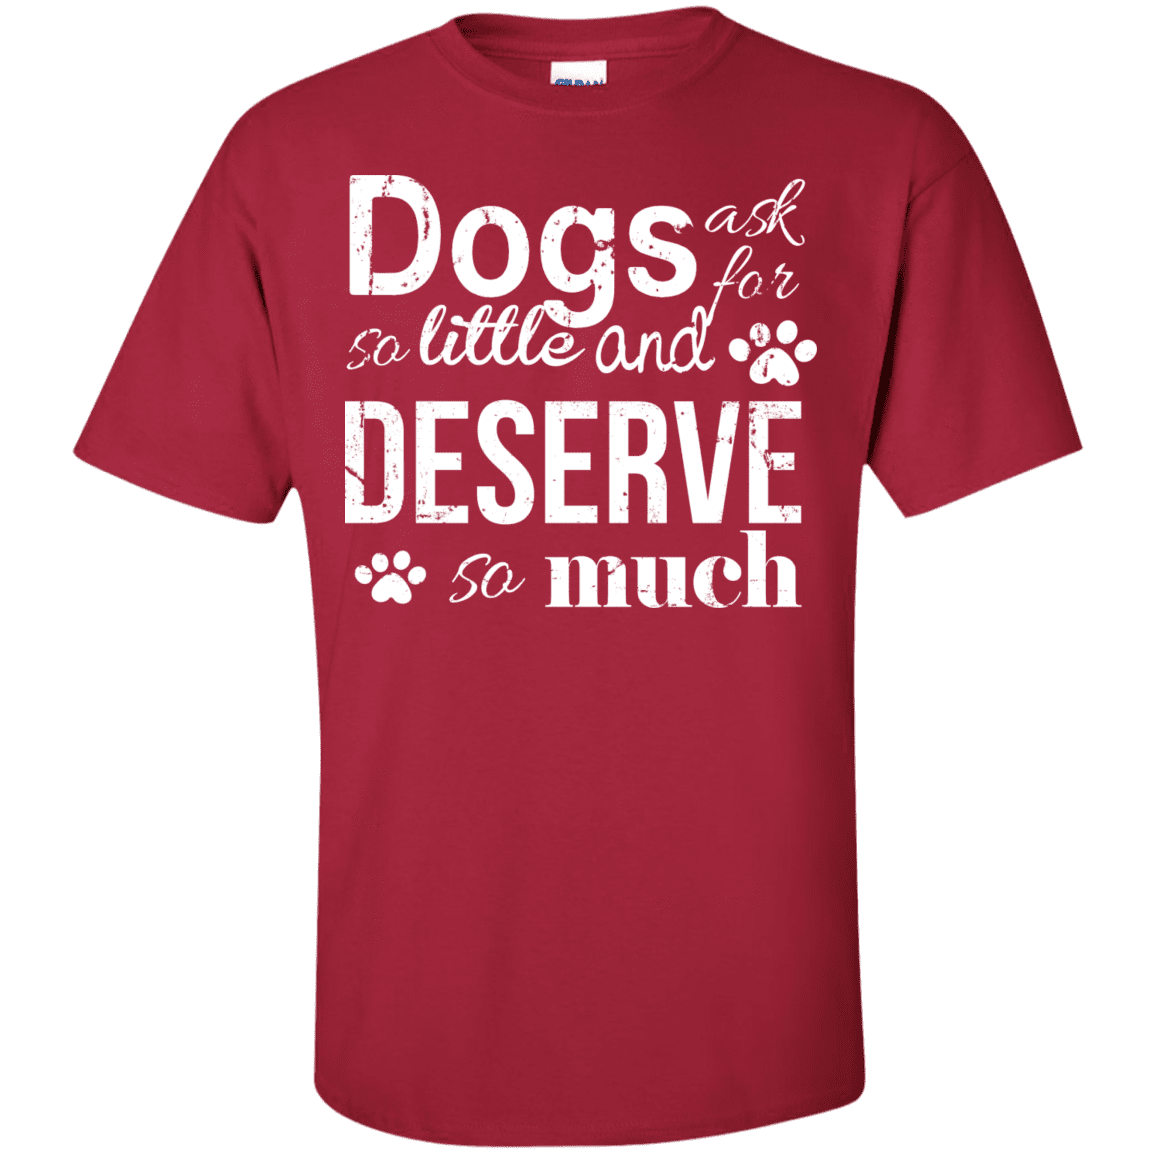 Dogs Deserve So Much - T Shirt.